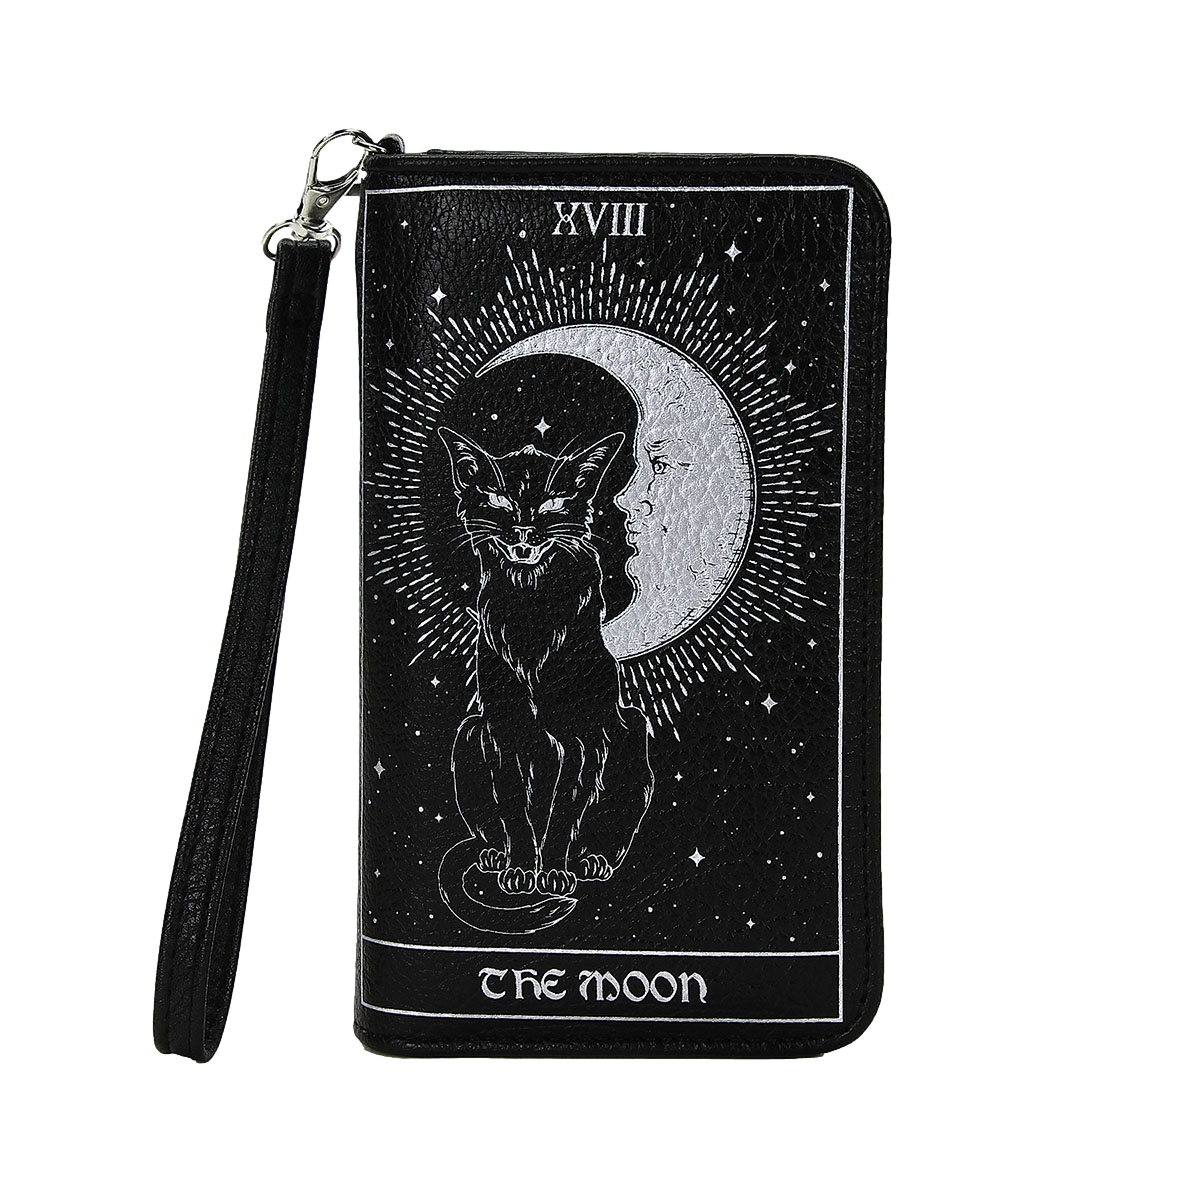 Vinyl tarot card wallet featuring The Moon card with a black cat sitting in front of a crescent moon surrounded by rays